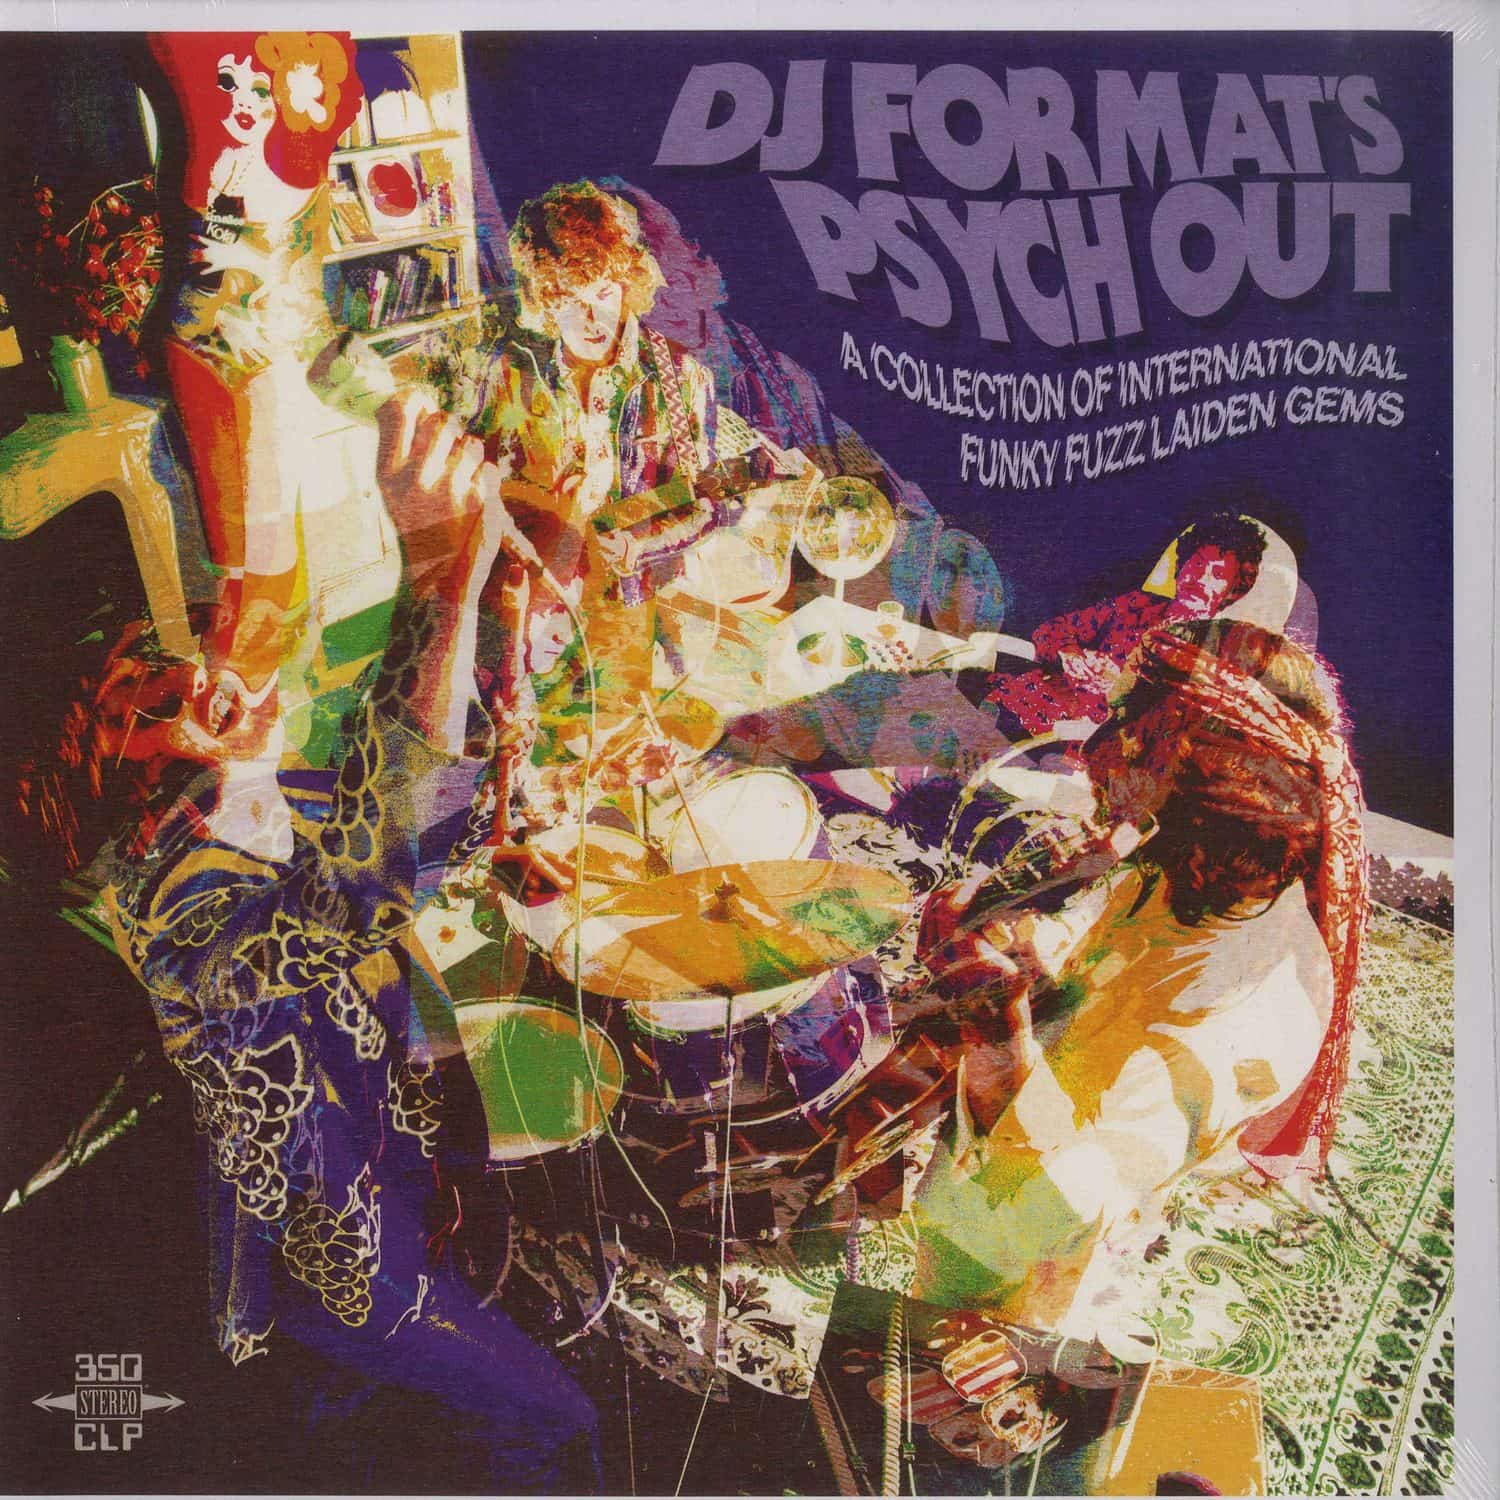 Various Artists - DJ FORMATS PSYCH OUT 